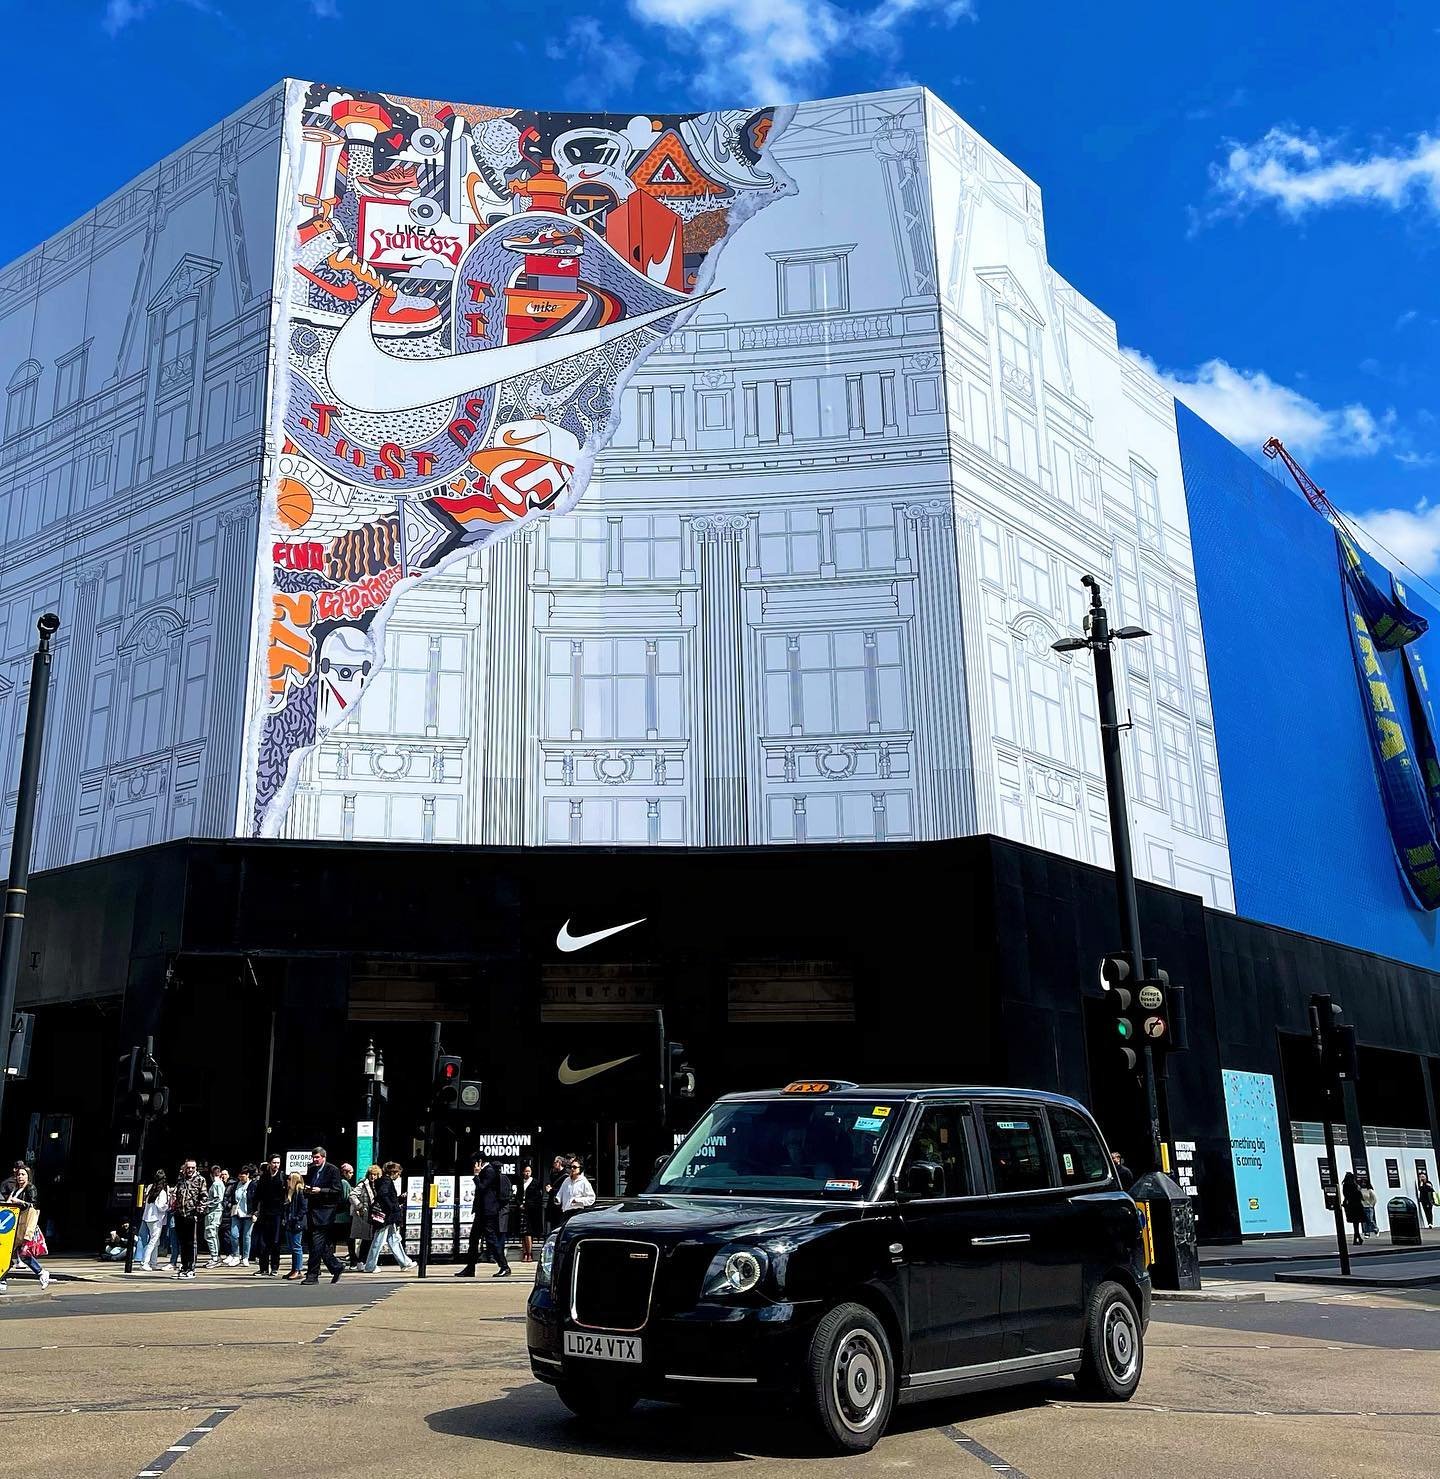 So happy to have been commissioned by @nike to create a bespoke mural for the facade of the London Flagship Nike Town Store. The Mural design capturing the spirit and essence of all things London. ❤️🇬🇧 
.
.
.
.
.
.
.
.
.
.
.
#justdidit #Nike #londo